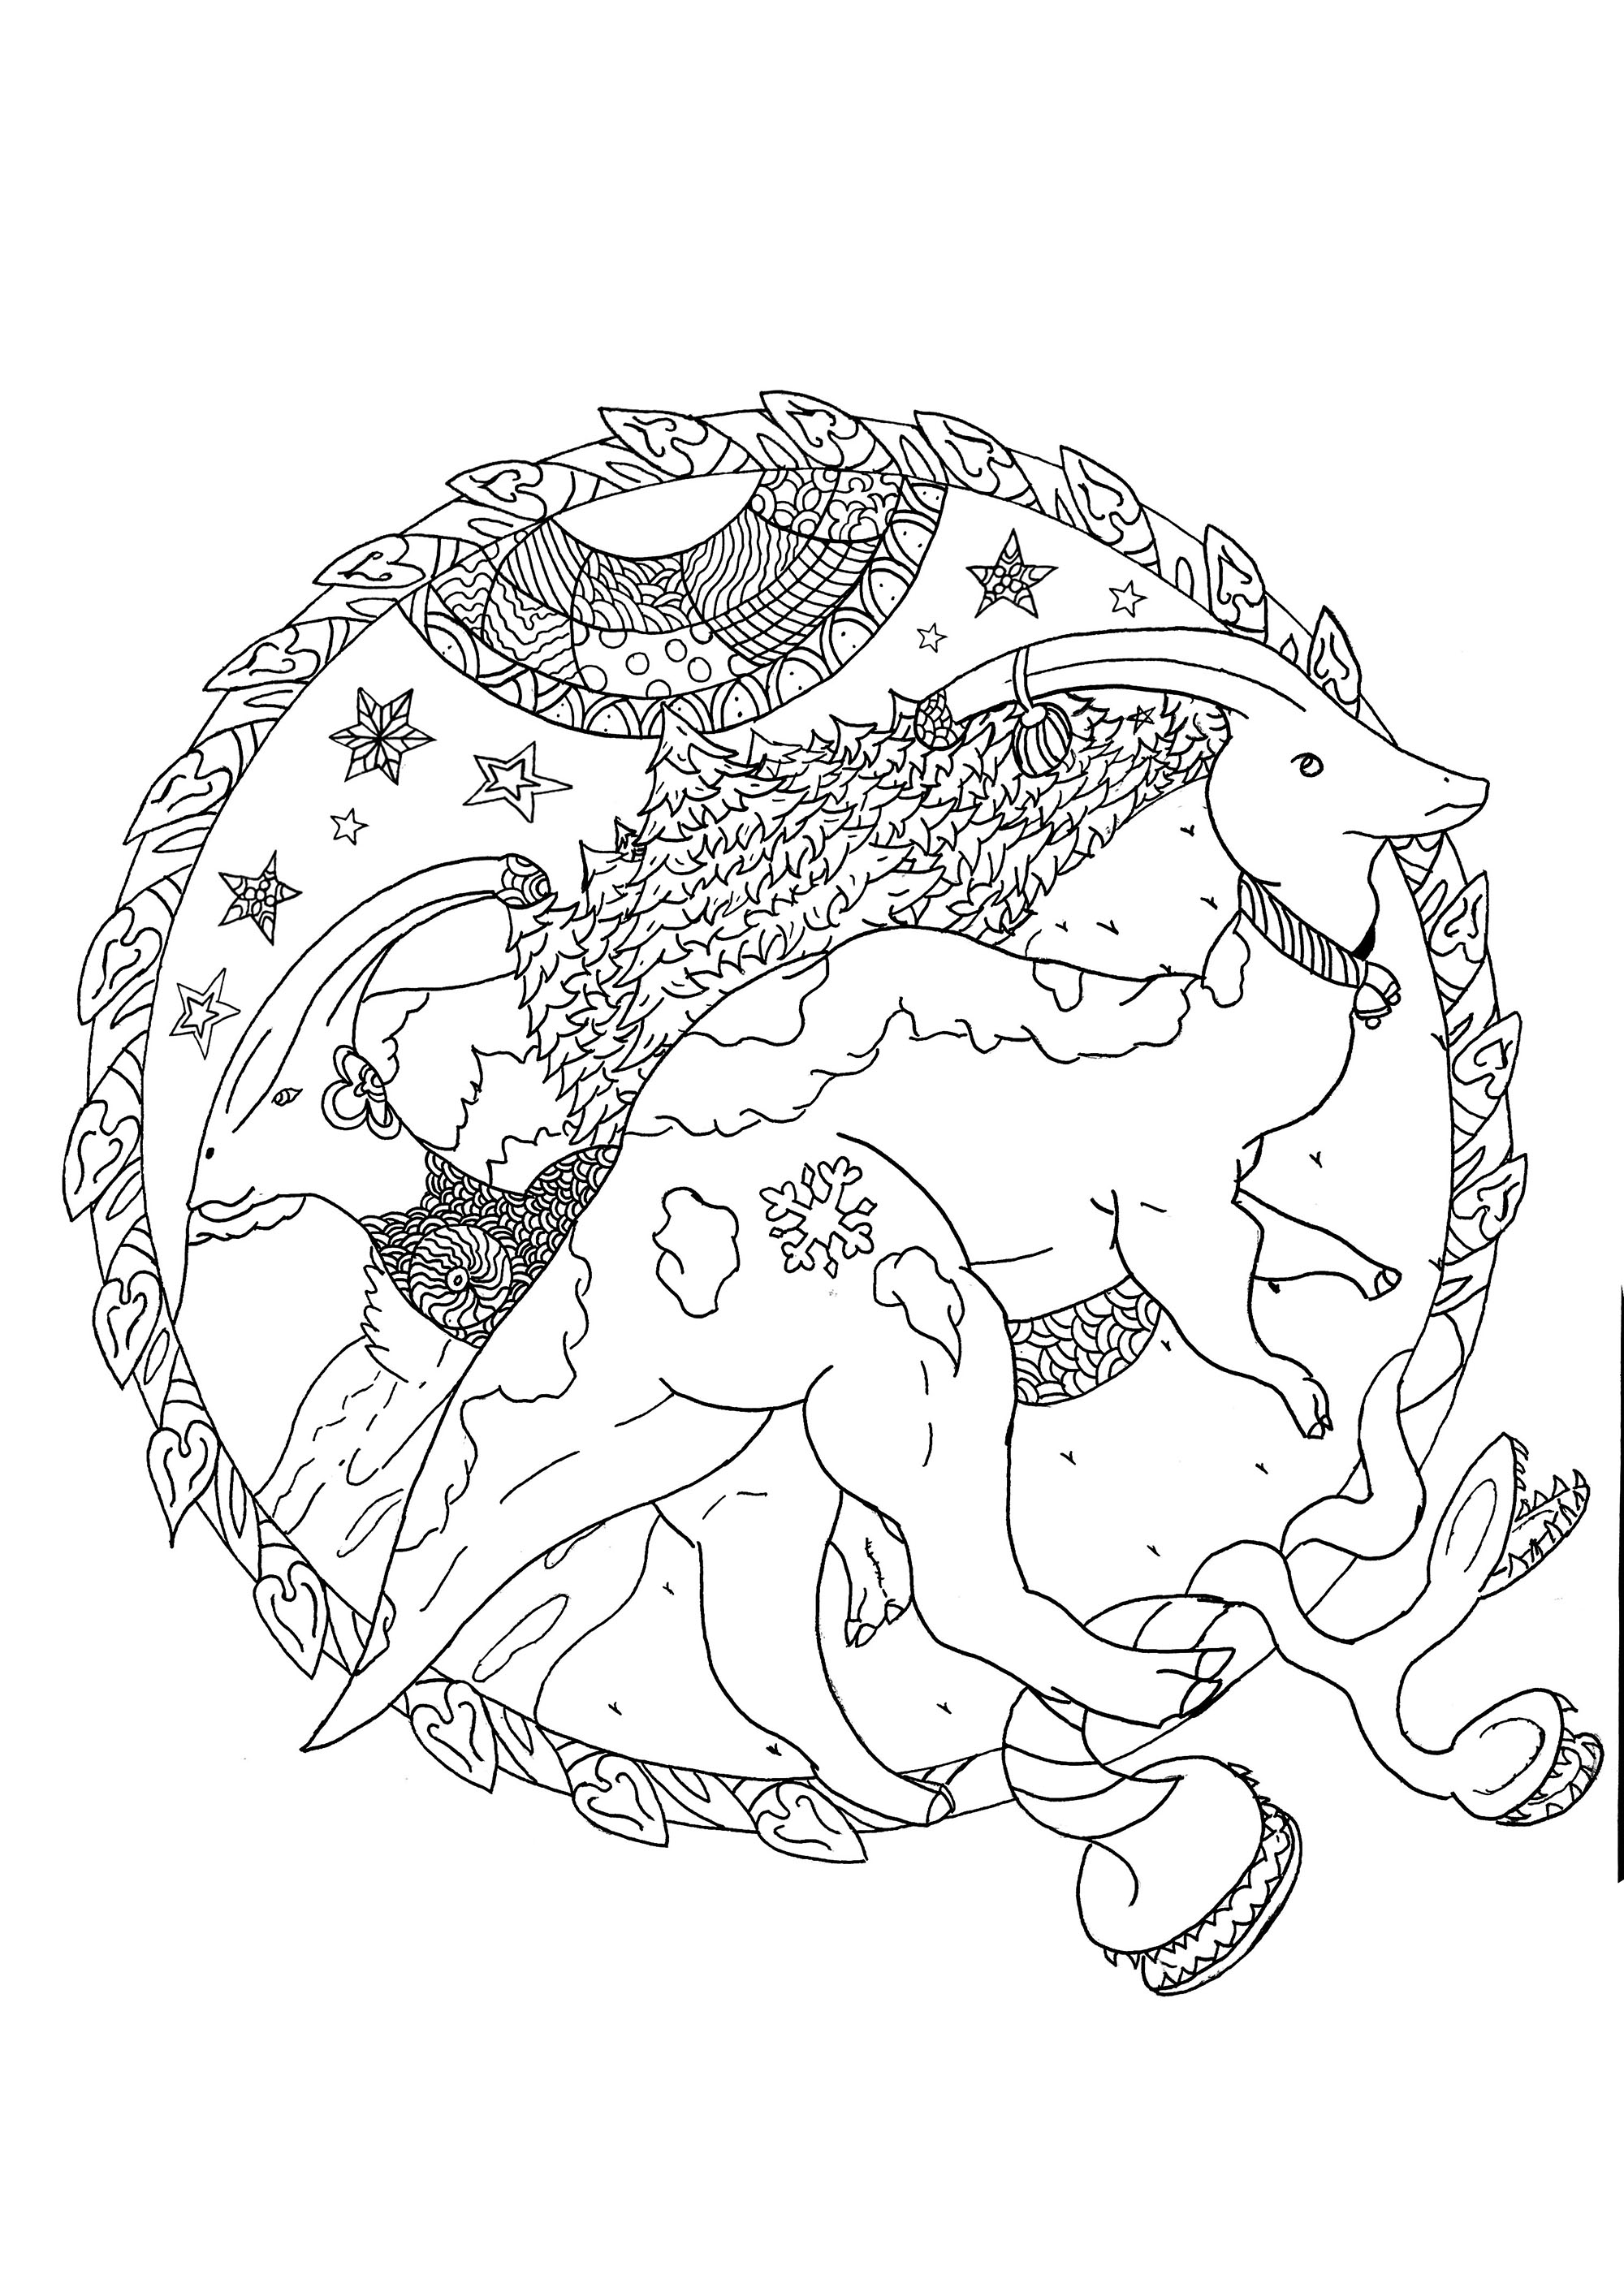 Two Parasaurolophus with pretty Christmas patterns, Artist : Gamma